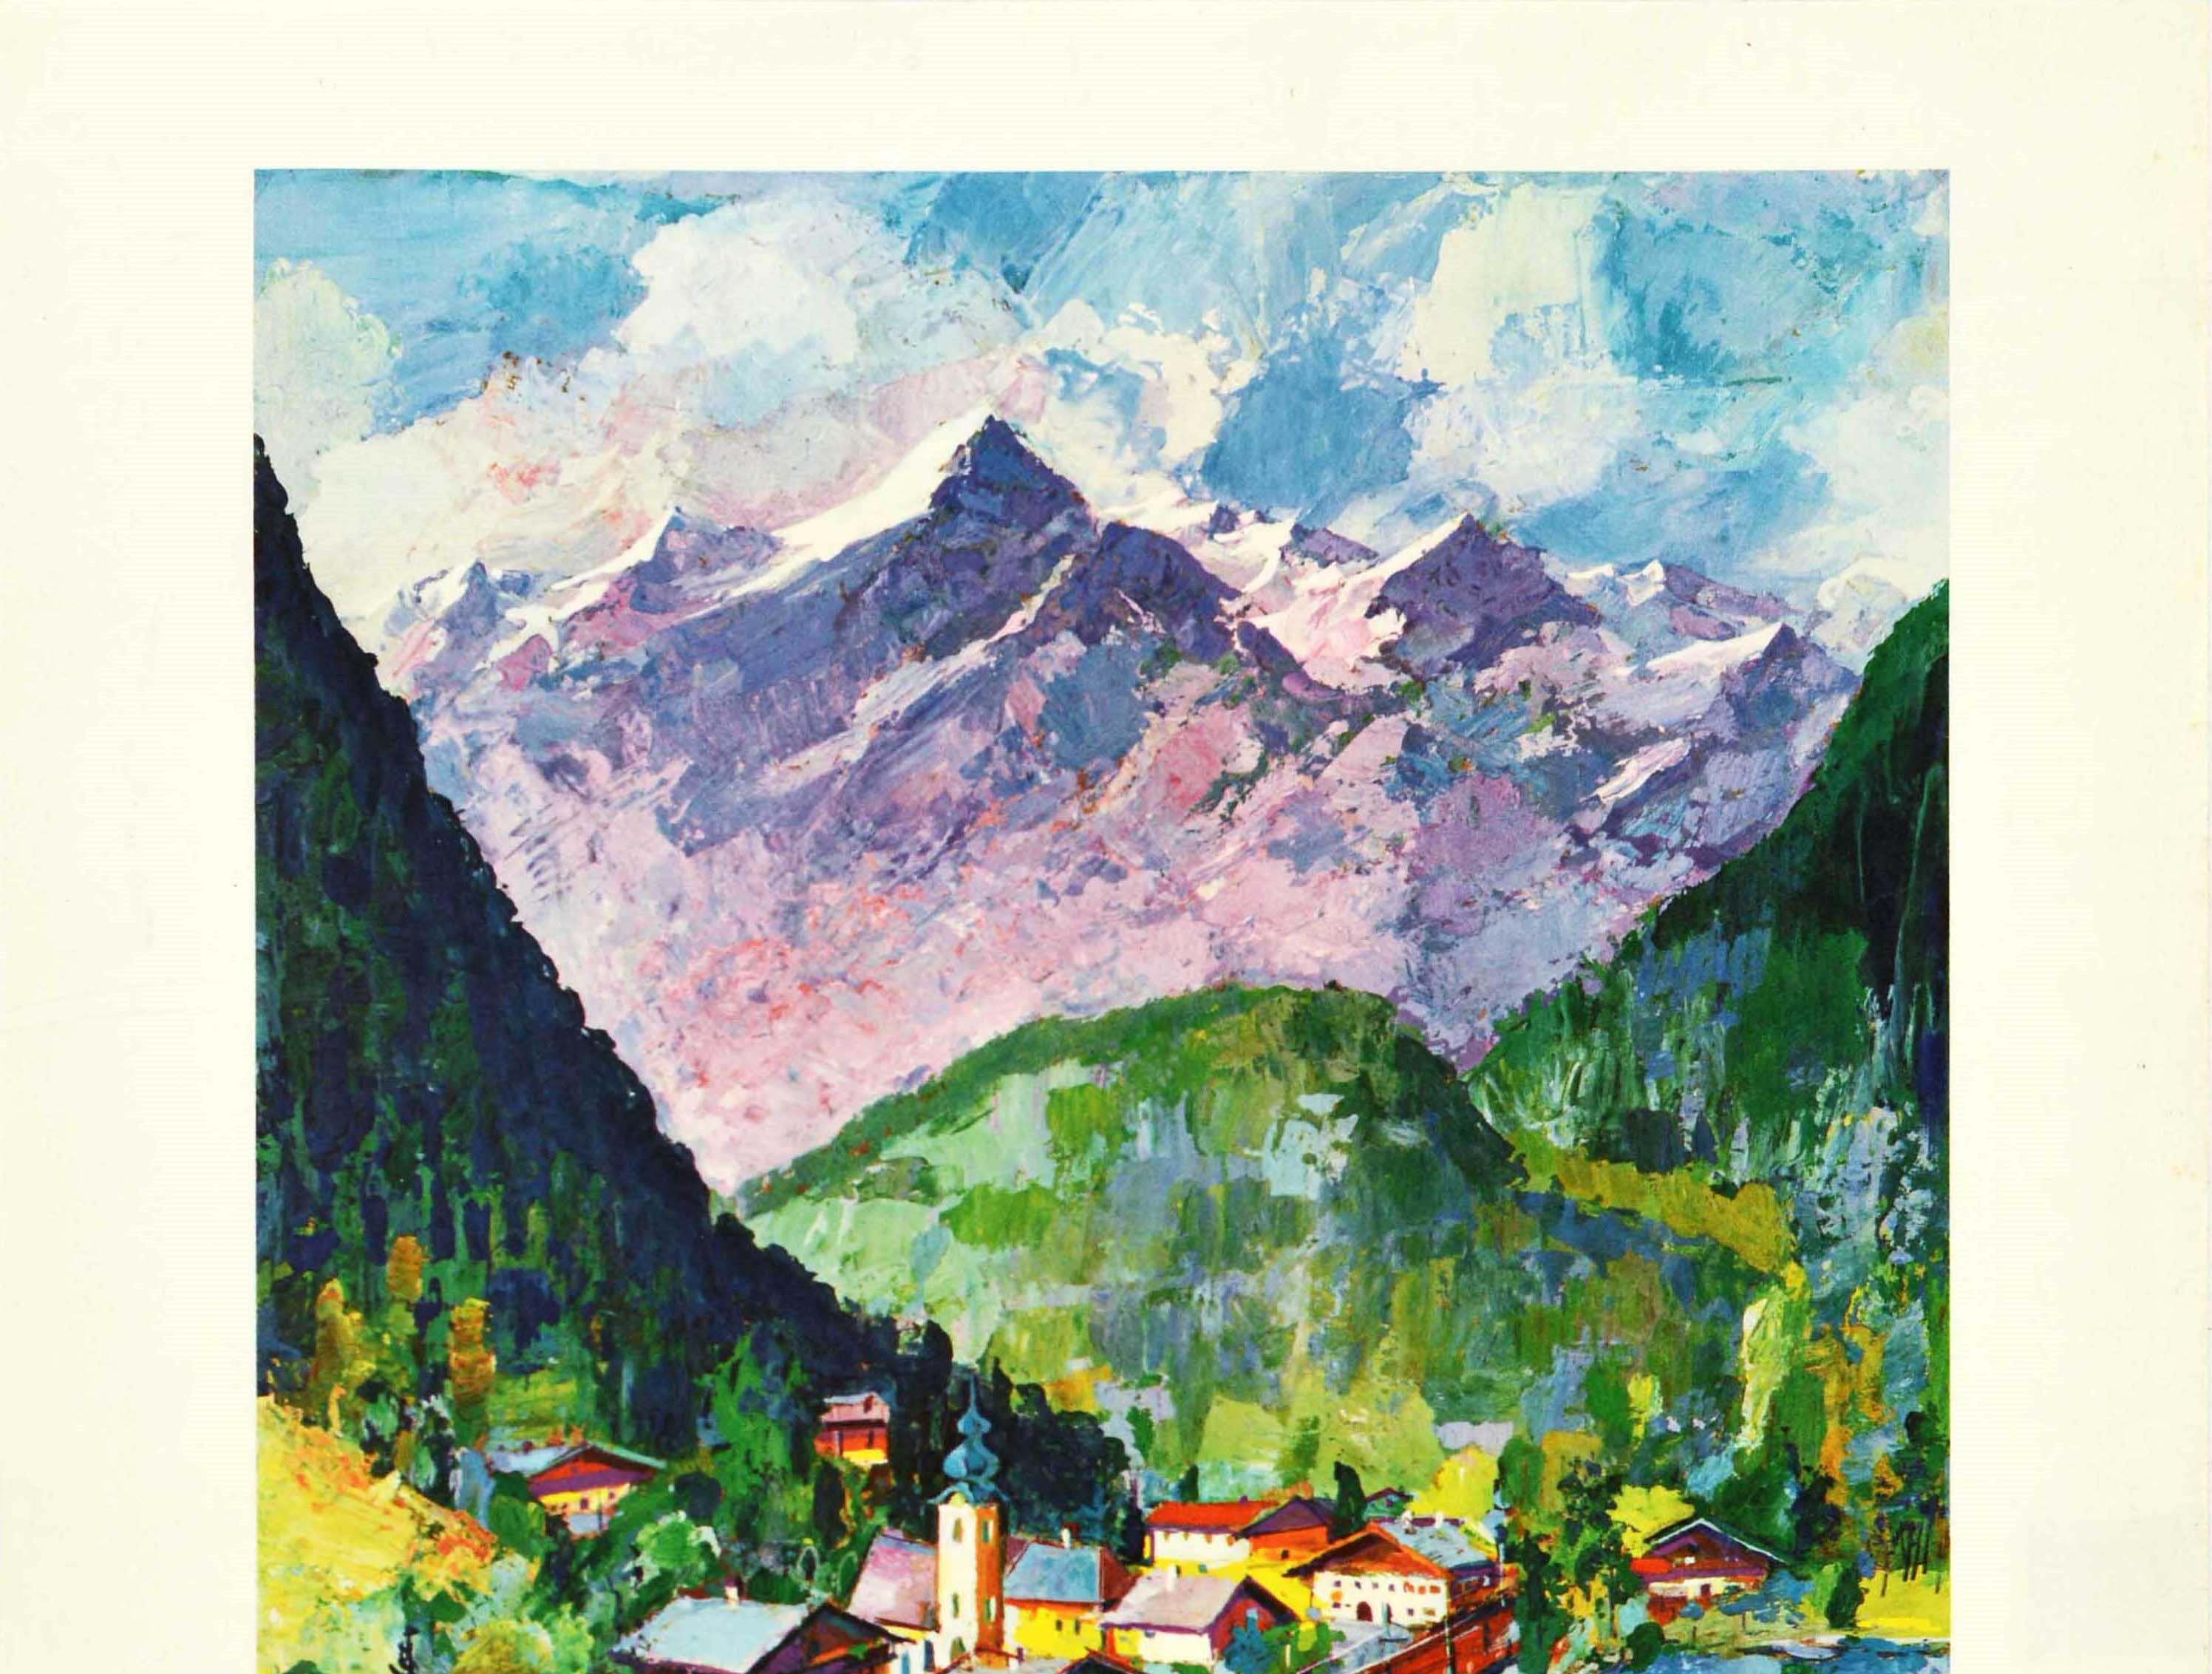 Original vintage travel poster for Austria issued by the Austrian Federal Railways featuring a scenic view of a train passing through a mountain valley with a small town and trees on the hills on one side of the tracks and a lake on the other, the